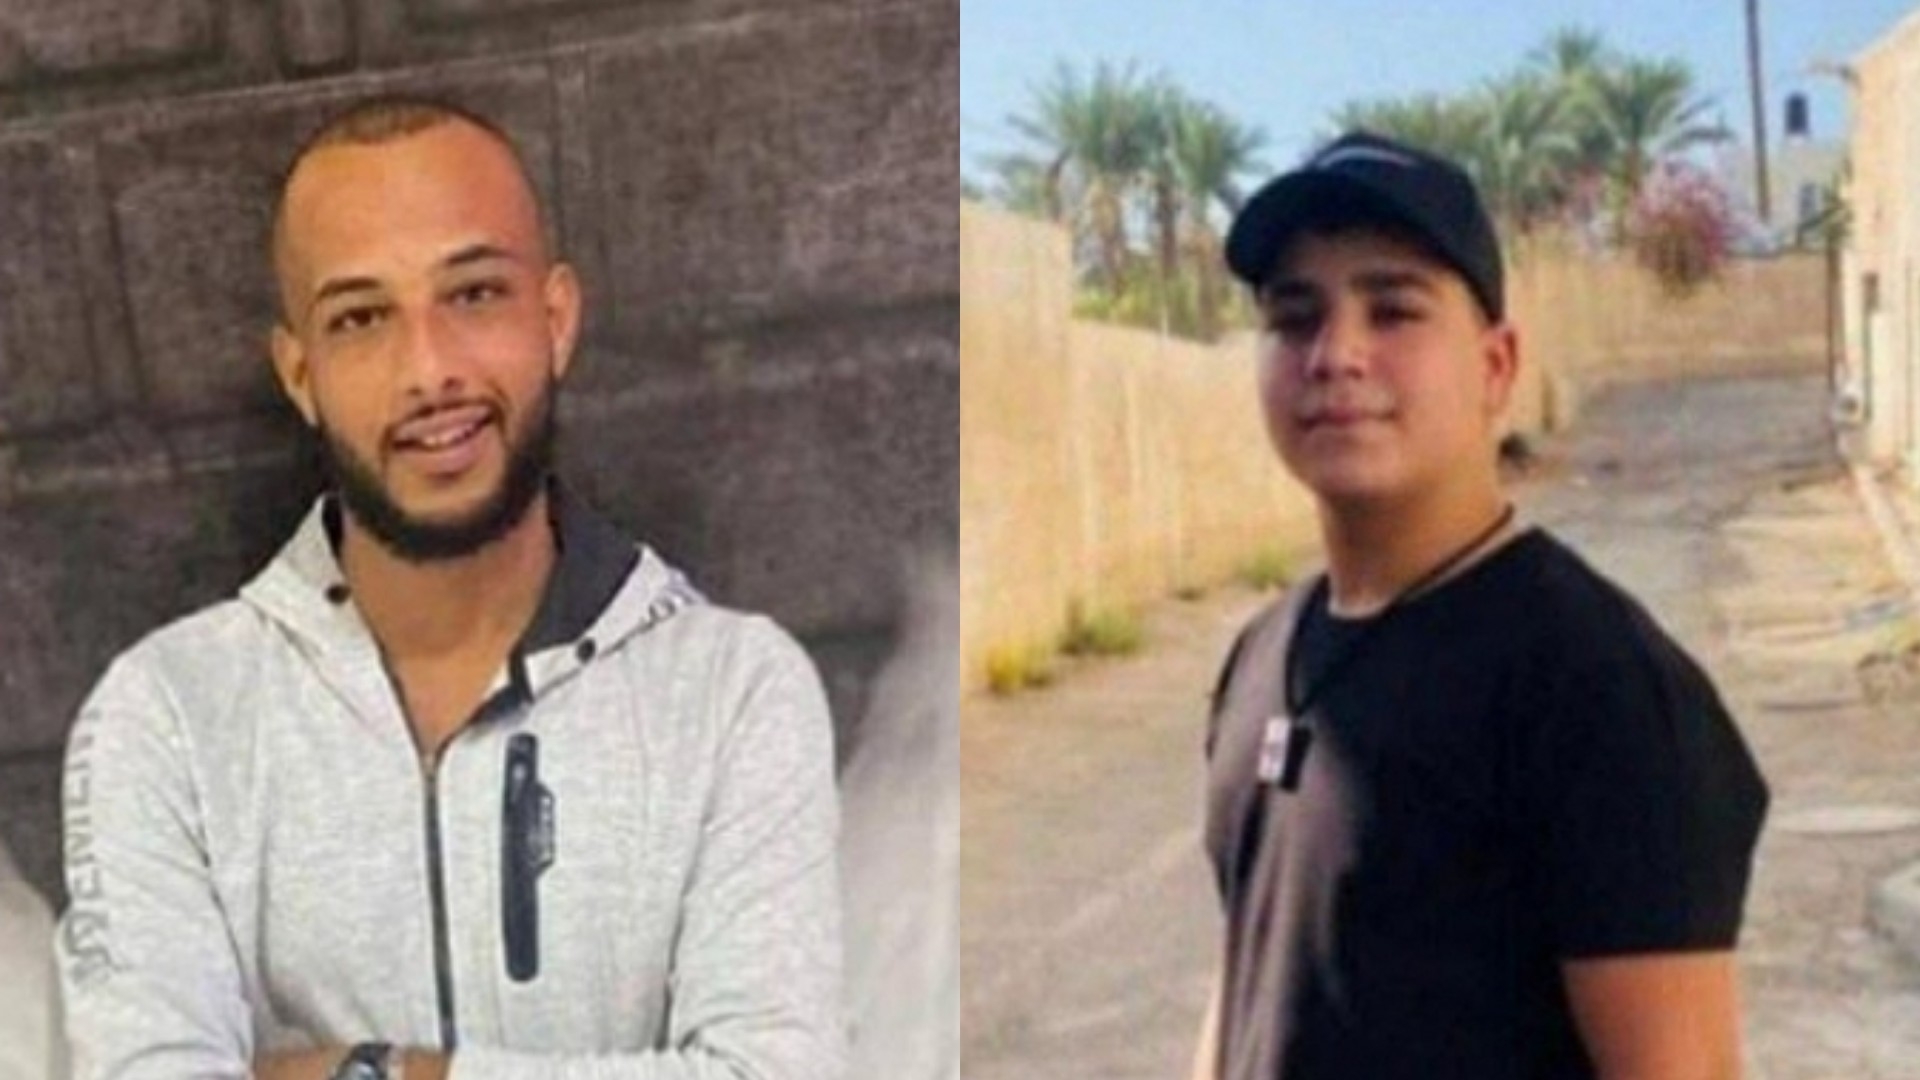 Mohammed Najum al-Omar (left) and Qusai al-Walaji (right) were shot dead by Israeli forces in Aqbat Jabr refugee camp in Jericho, occupied West Bank on 15 August 2023 (Screengrab/Facebook)